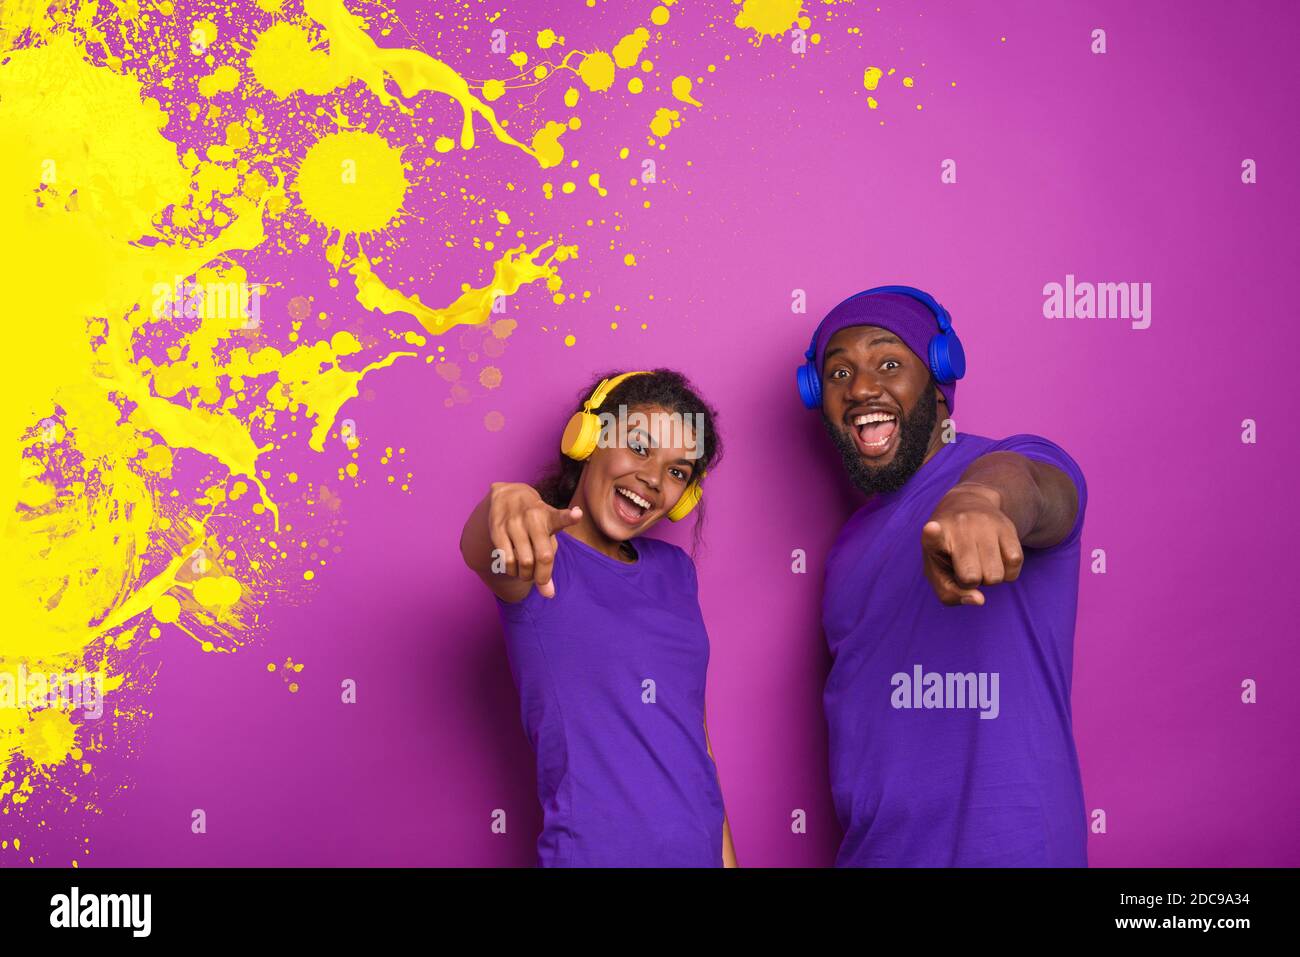 Couple with headset listen to music and have surprised expression. Purple background Stock Photo